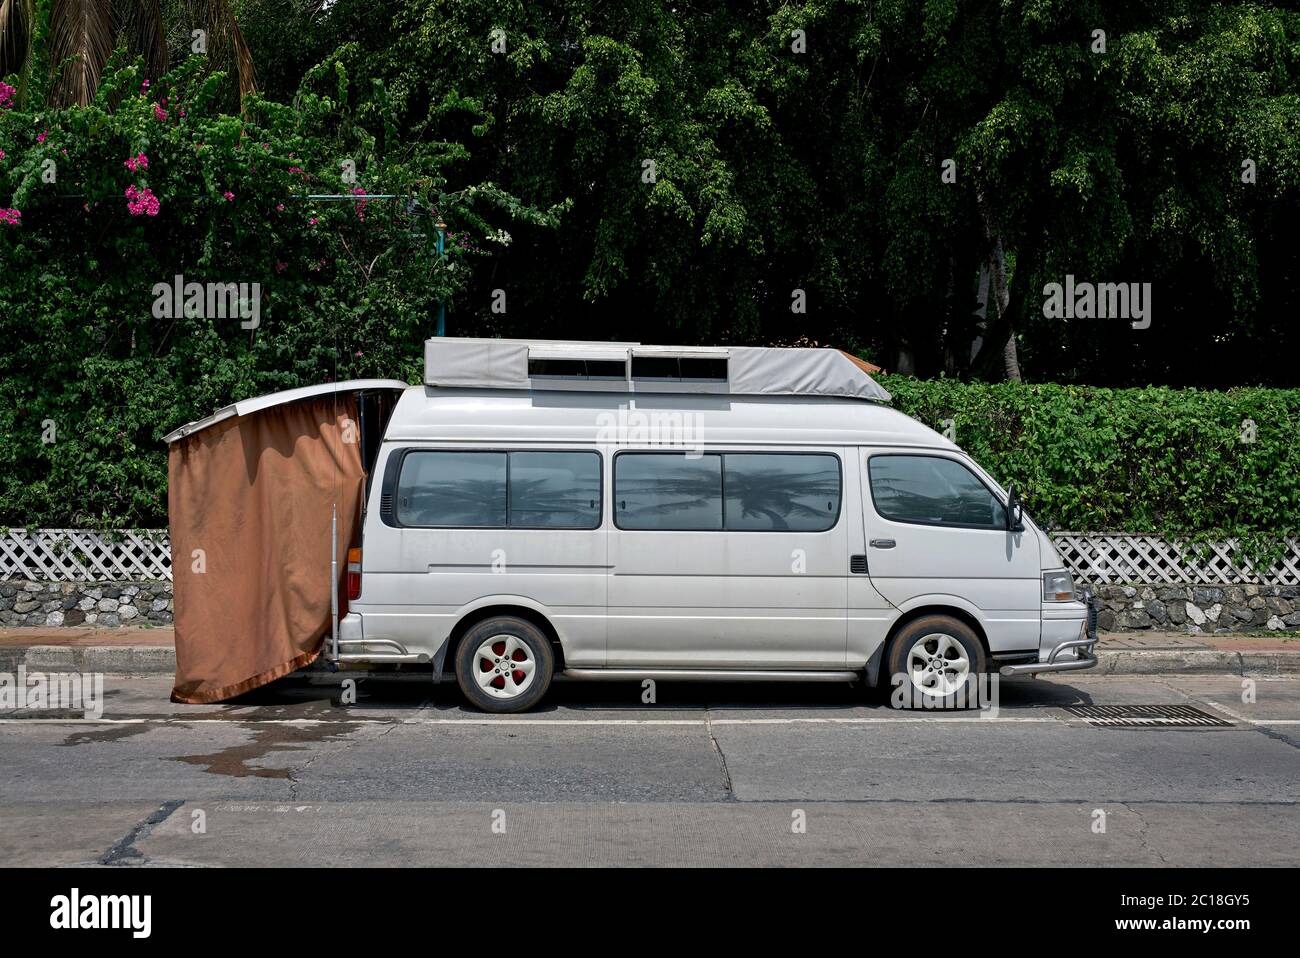 Caravanette, or camper van, with rear fitted shower curtain parked on the street clearly recently used. Thailand Southeast asia Stock Photo